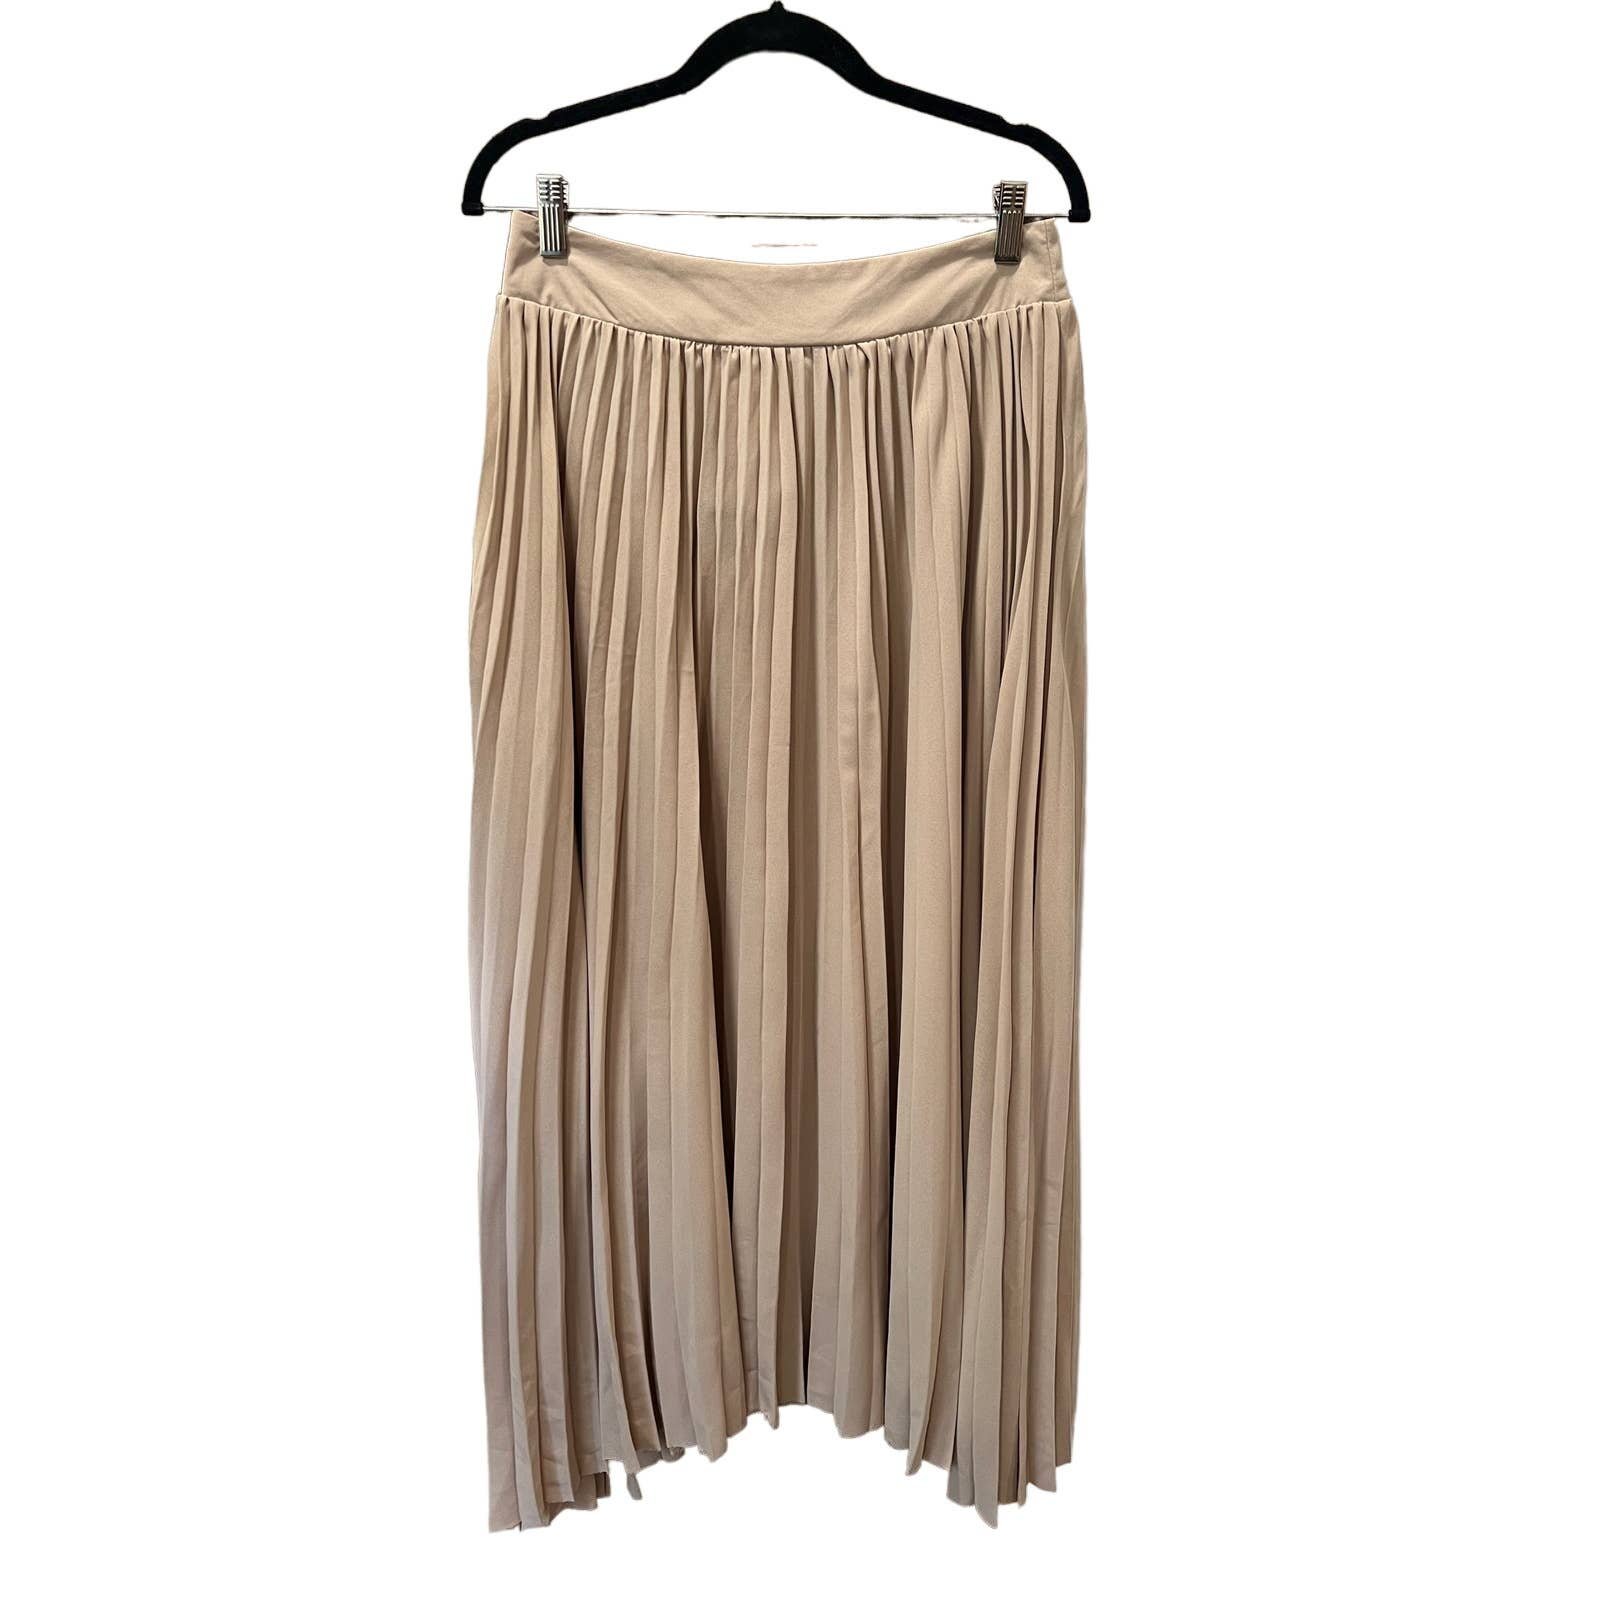 save up to 70% NWT Miamisty Pleated Maxi Skirt iwpDaQCA